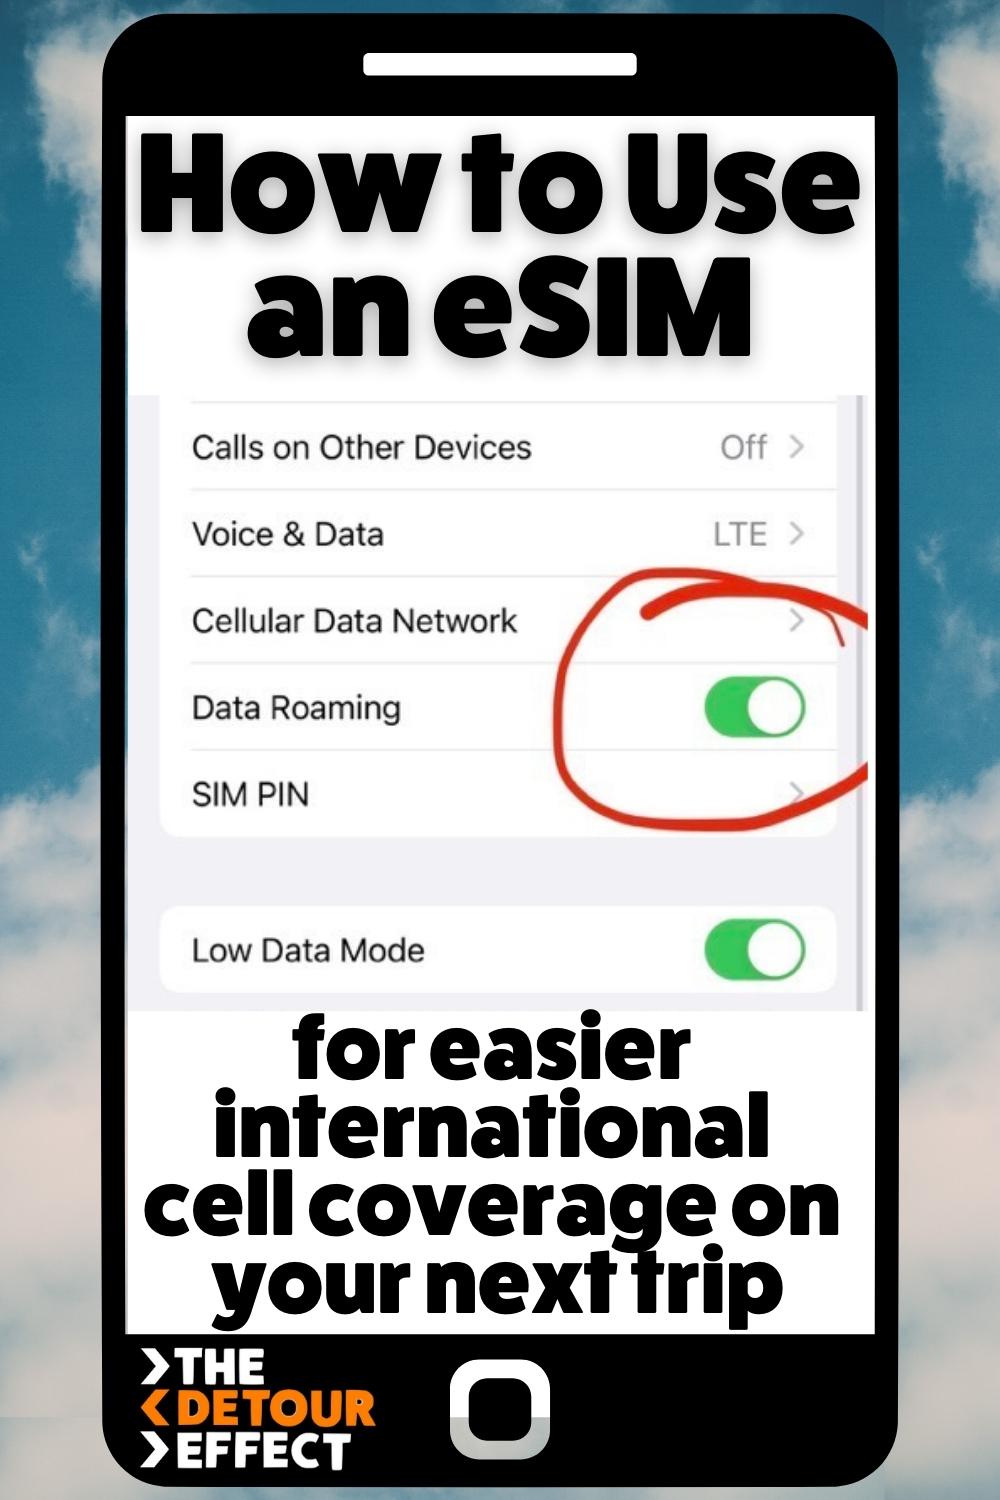 Can I activate eSIM from another country?